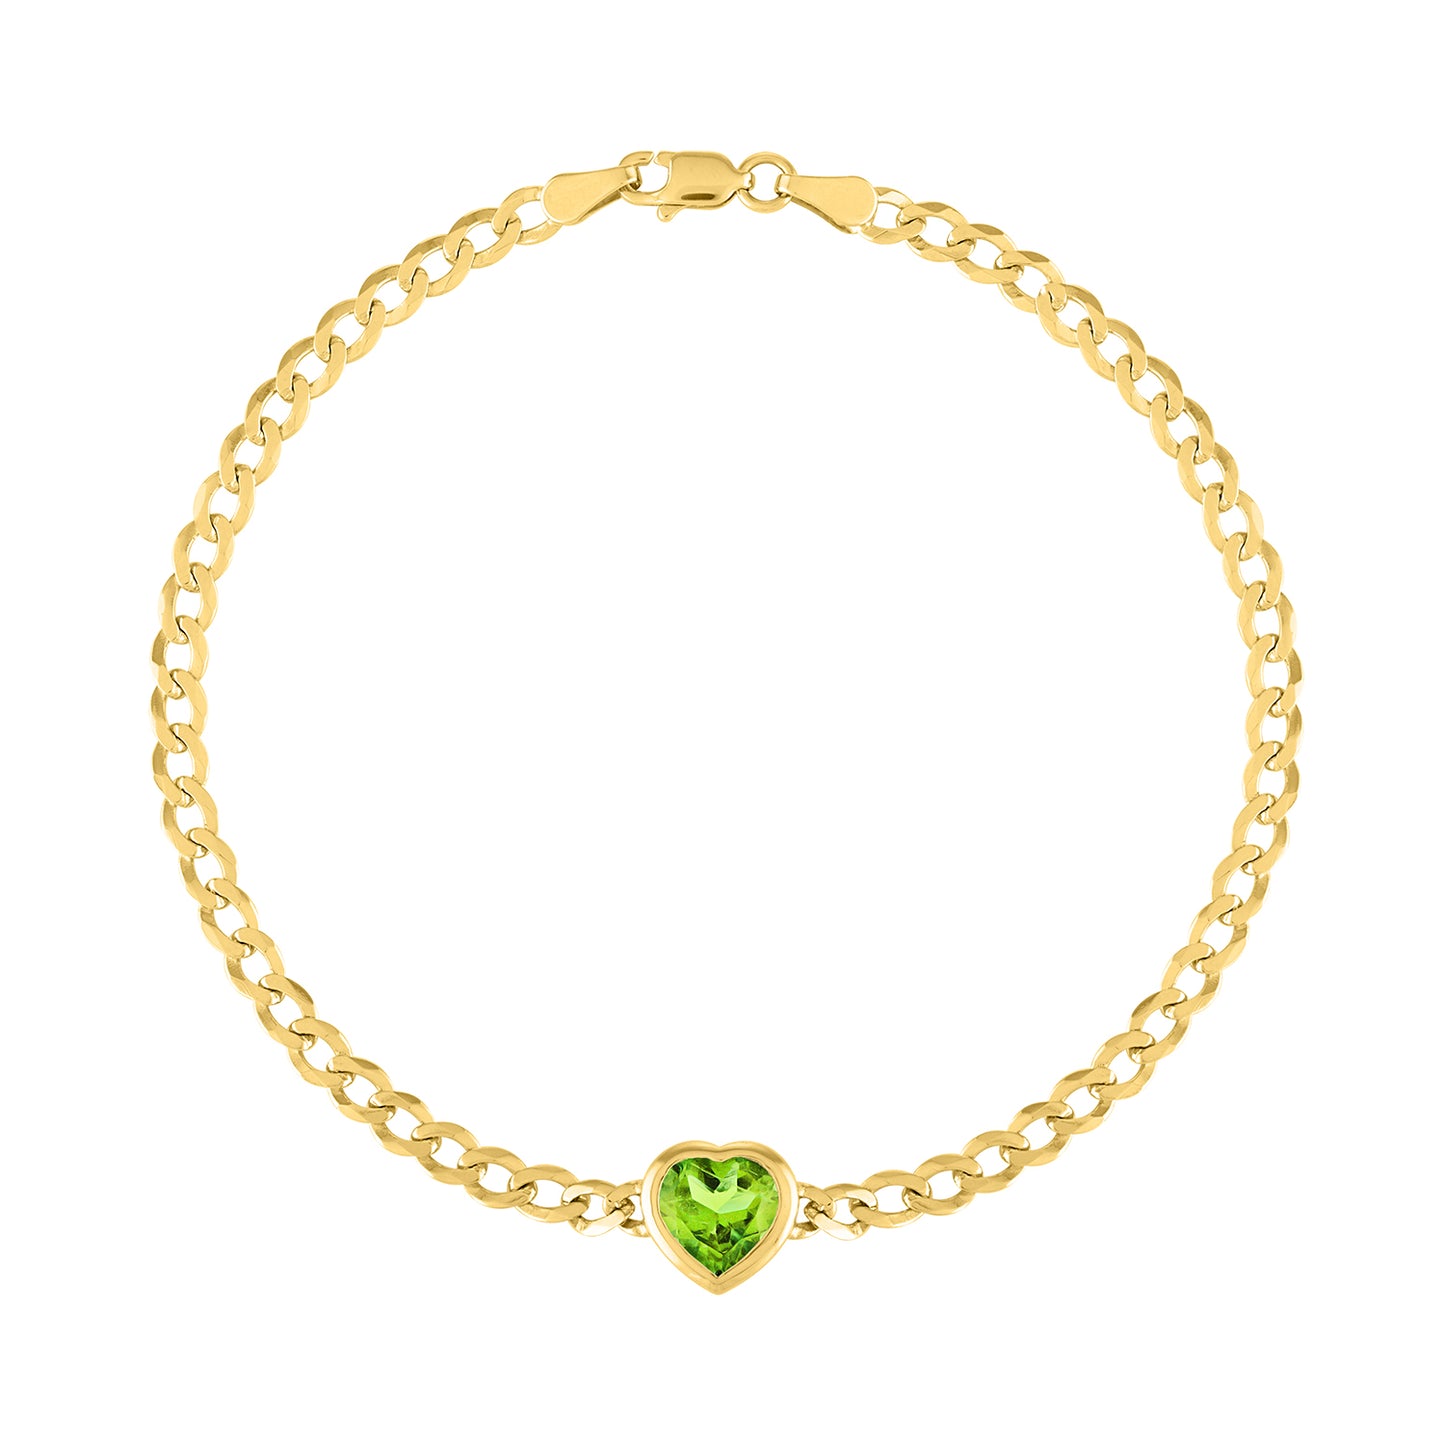 Yellow gold cuban link chain bracelet with a heart shaped bezeled peridot in the center. 